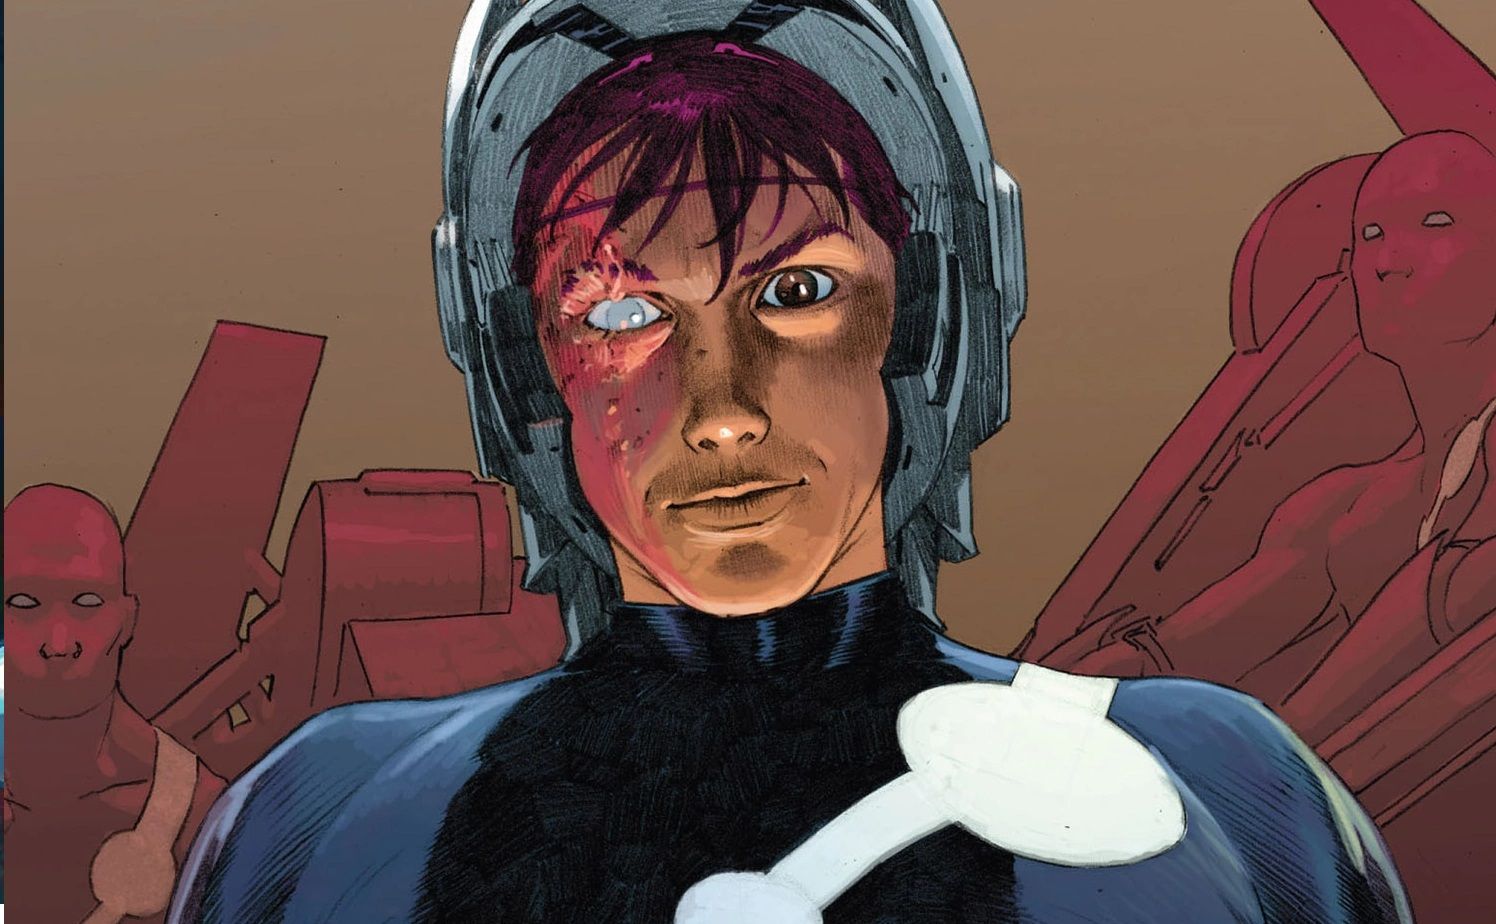 The Maker Reed Richards